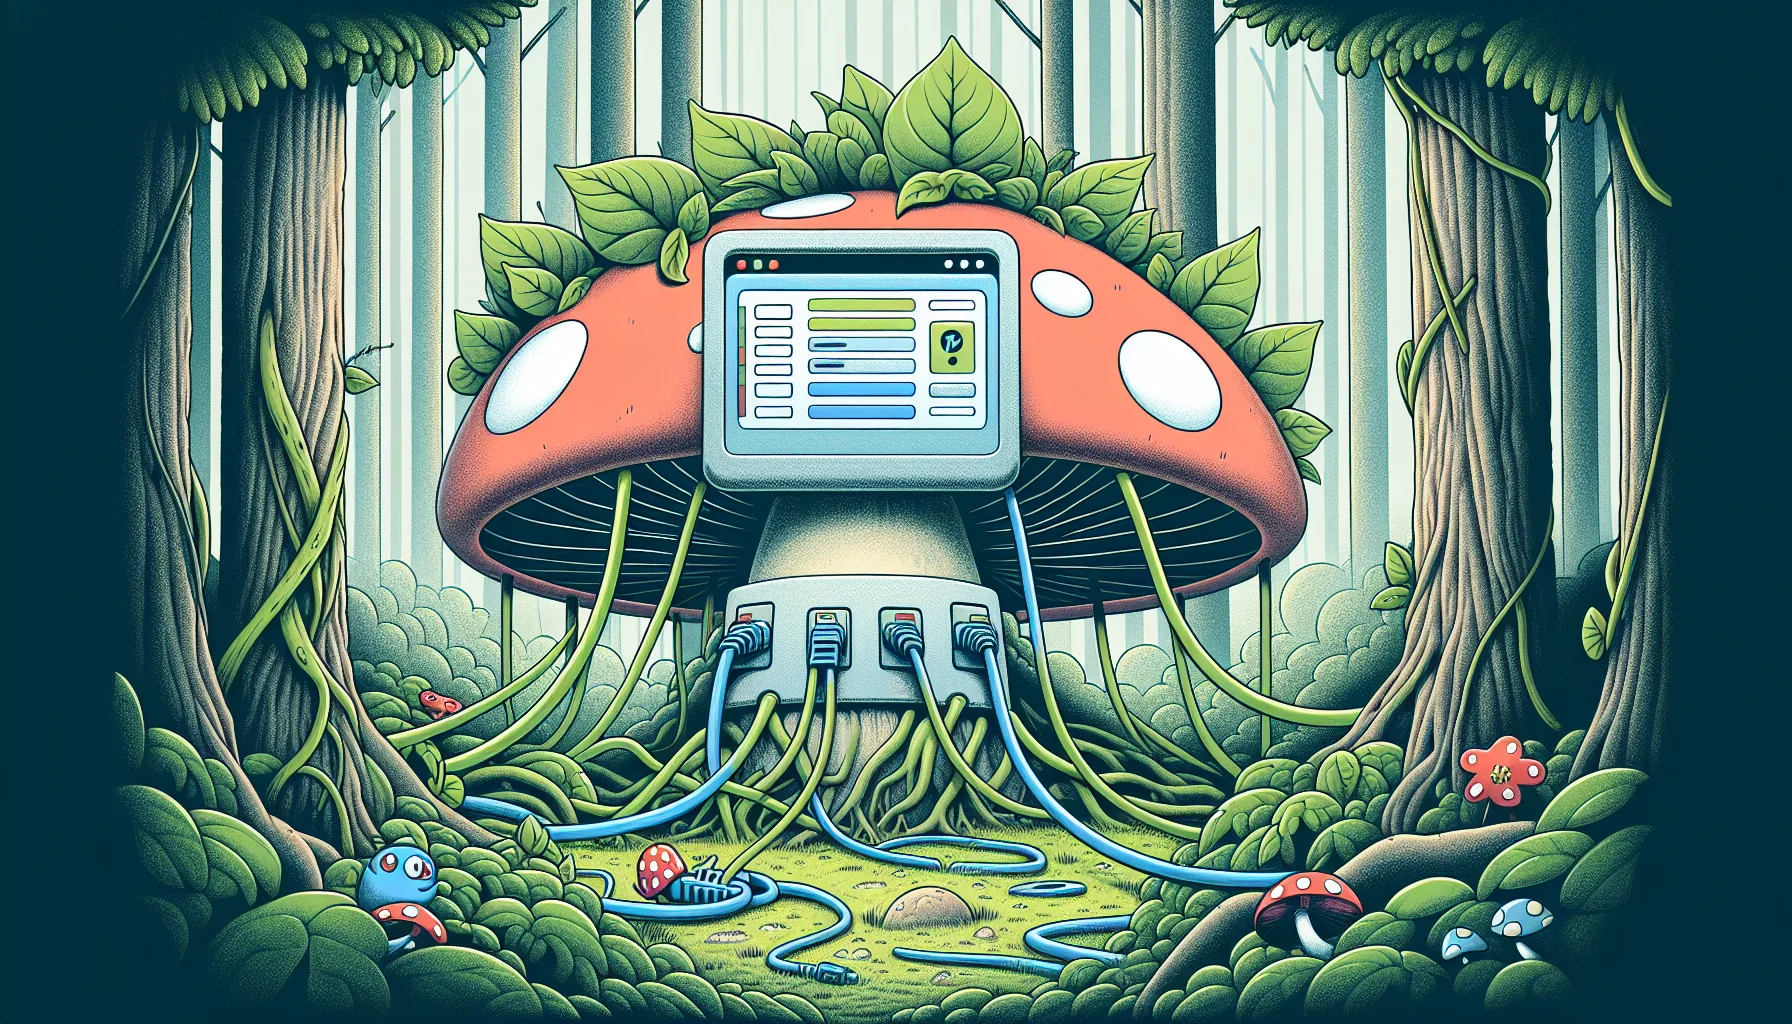 Design an amusing and engaging scene displaying a control panel for a website, similar in function to a concept like a wordpress cpanel, situated in an unexpectedly whimsical scenario. Perhaps the control panel is perched on an overgrown, cartoonish mushroom in a dense forest, with data streams resembling meandering vines extending from it. Enhance the humor by introducing a few digital creatures interacting with it, visually indicating ongoing website hosting and maintenance processes.